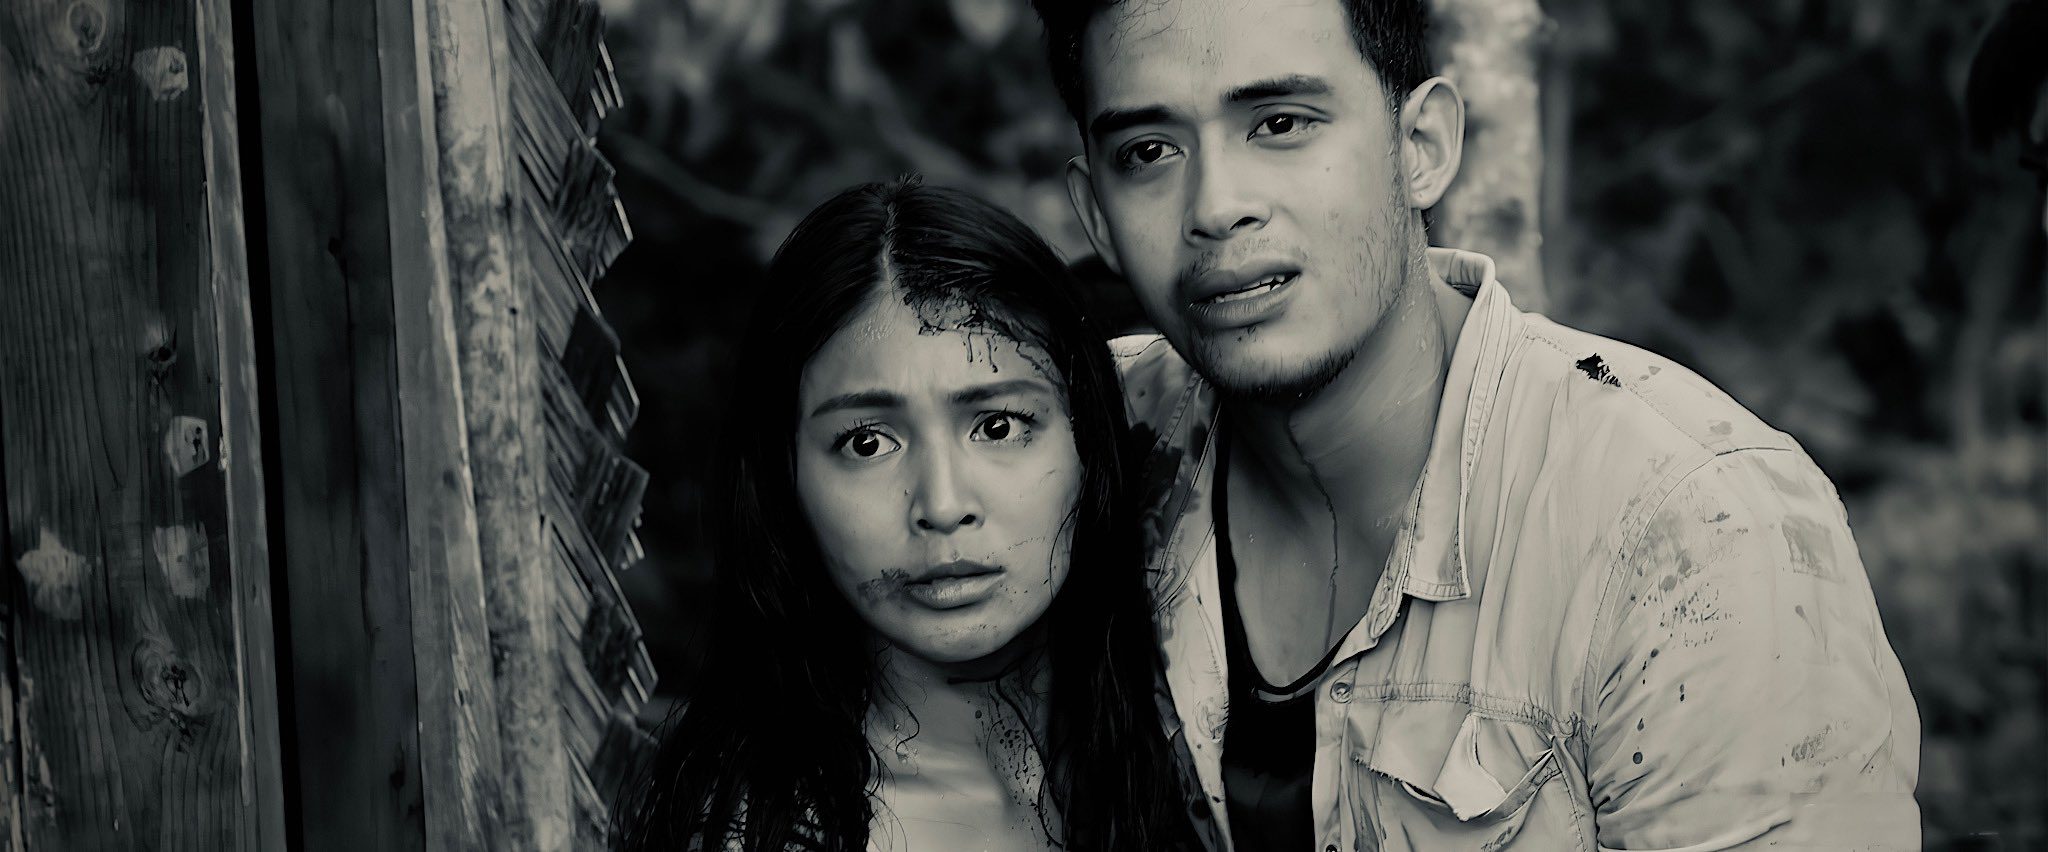 WATCH: Eerie 'Greed' trailer teases dark fate of Nadine Lustre and Diego  Loyzaga